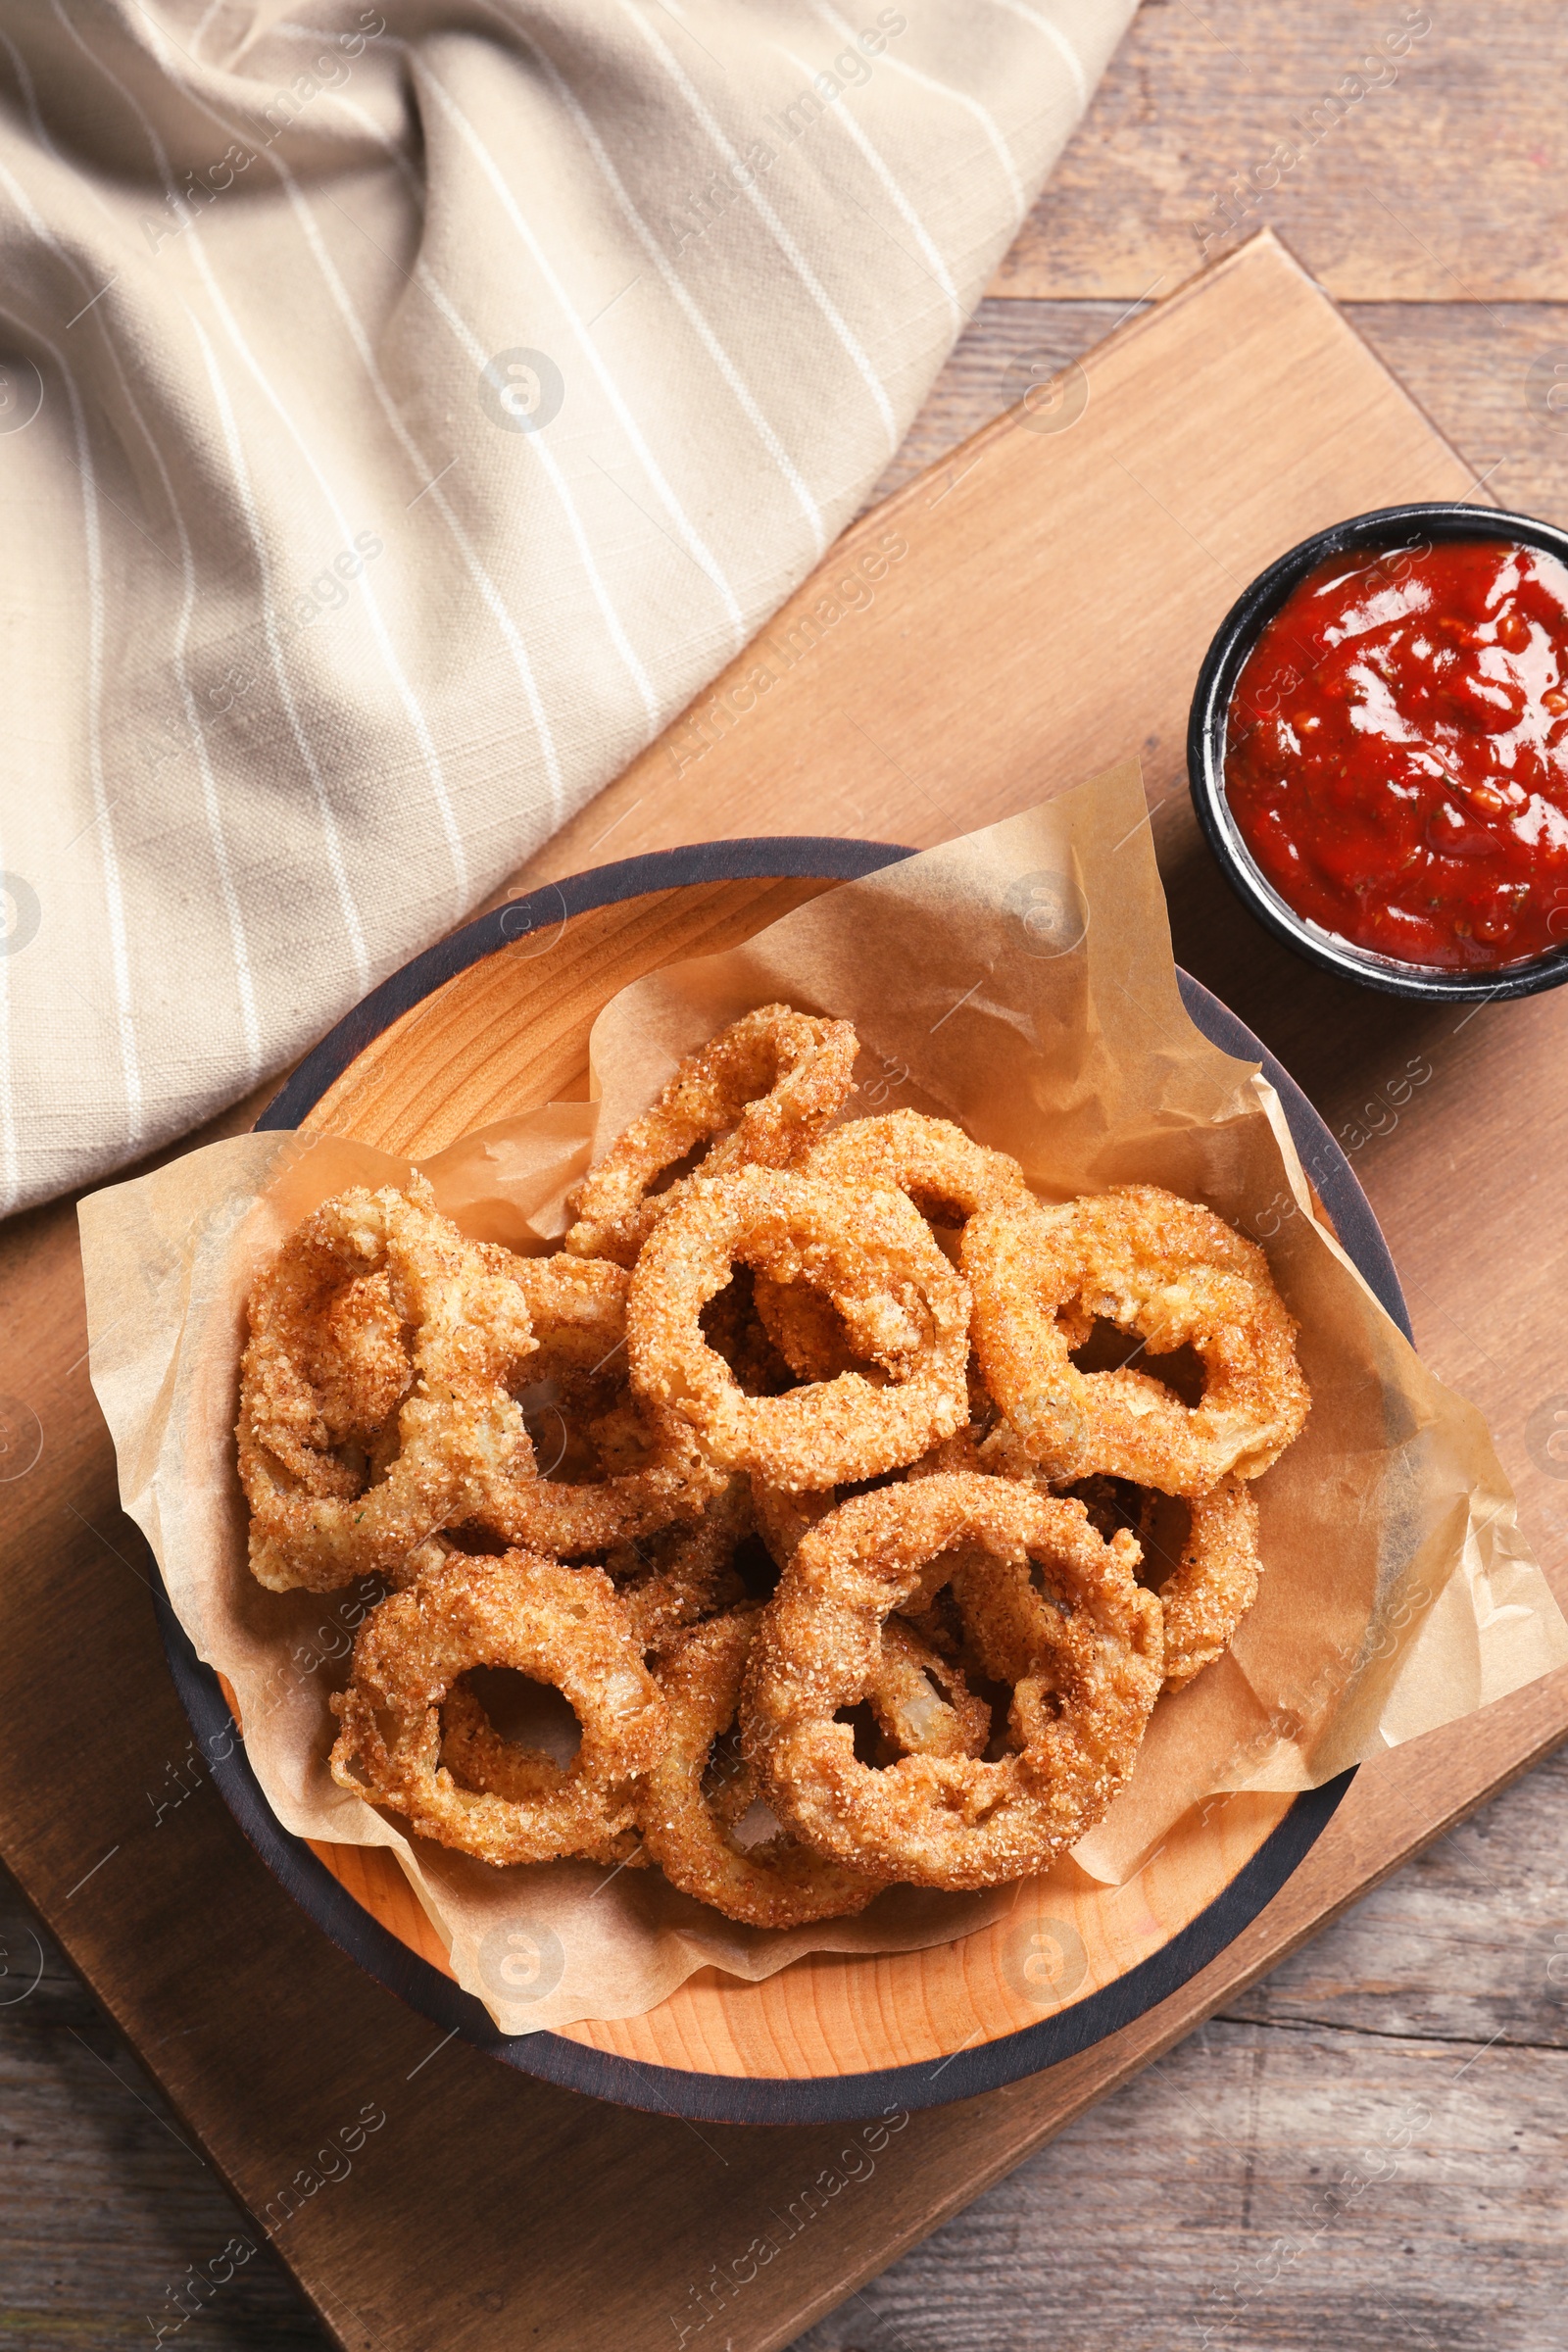 Photo of Homemade crunchy fried onion rings in plate and sauce on wooden background, top view